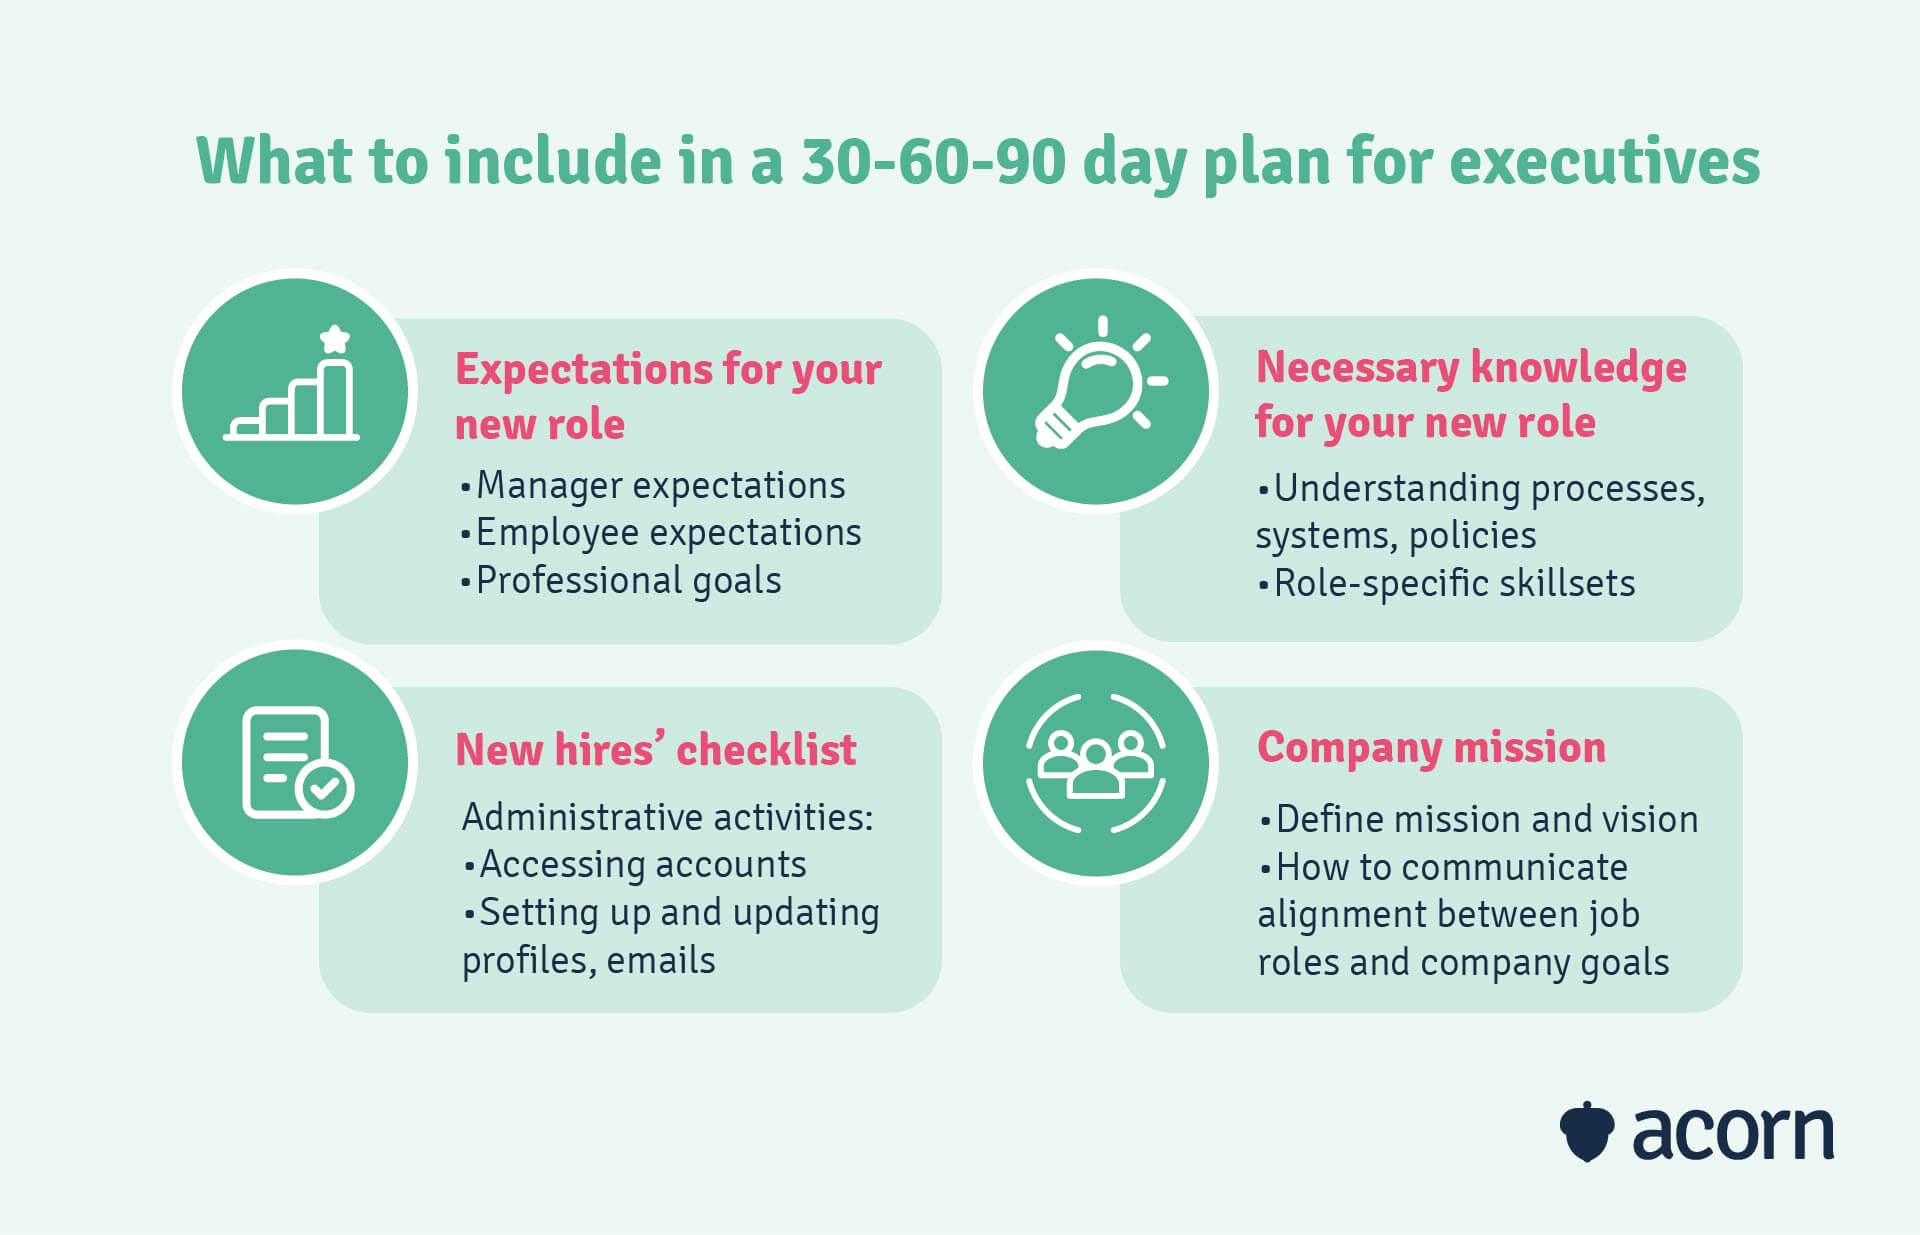 What to include in a 30-60-90 day plan for executives